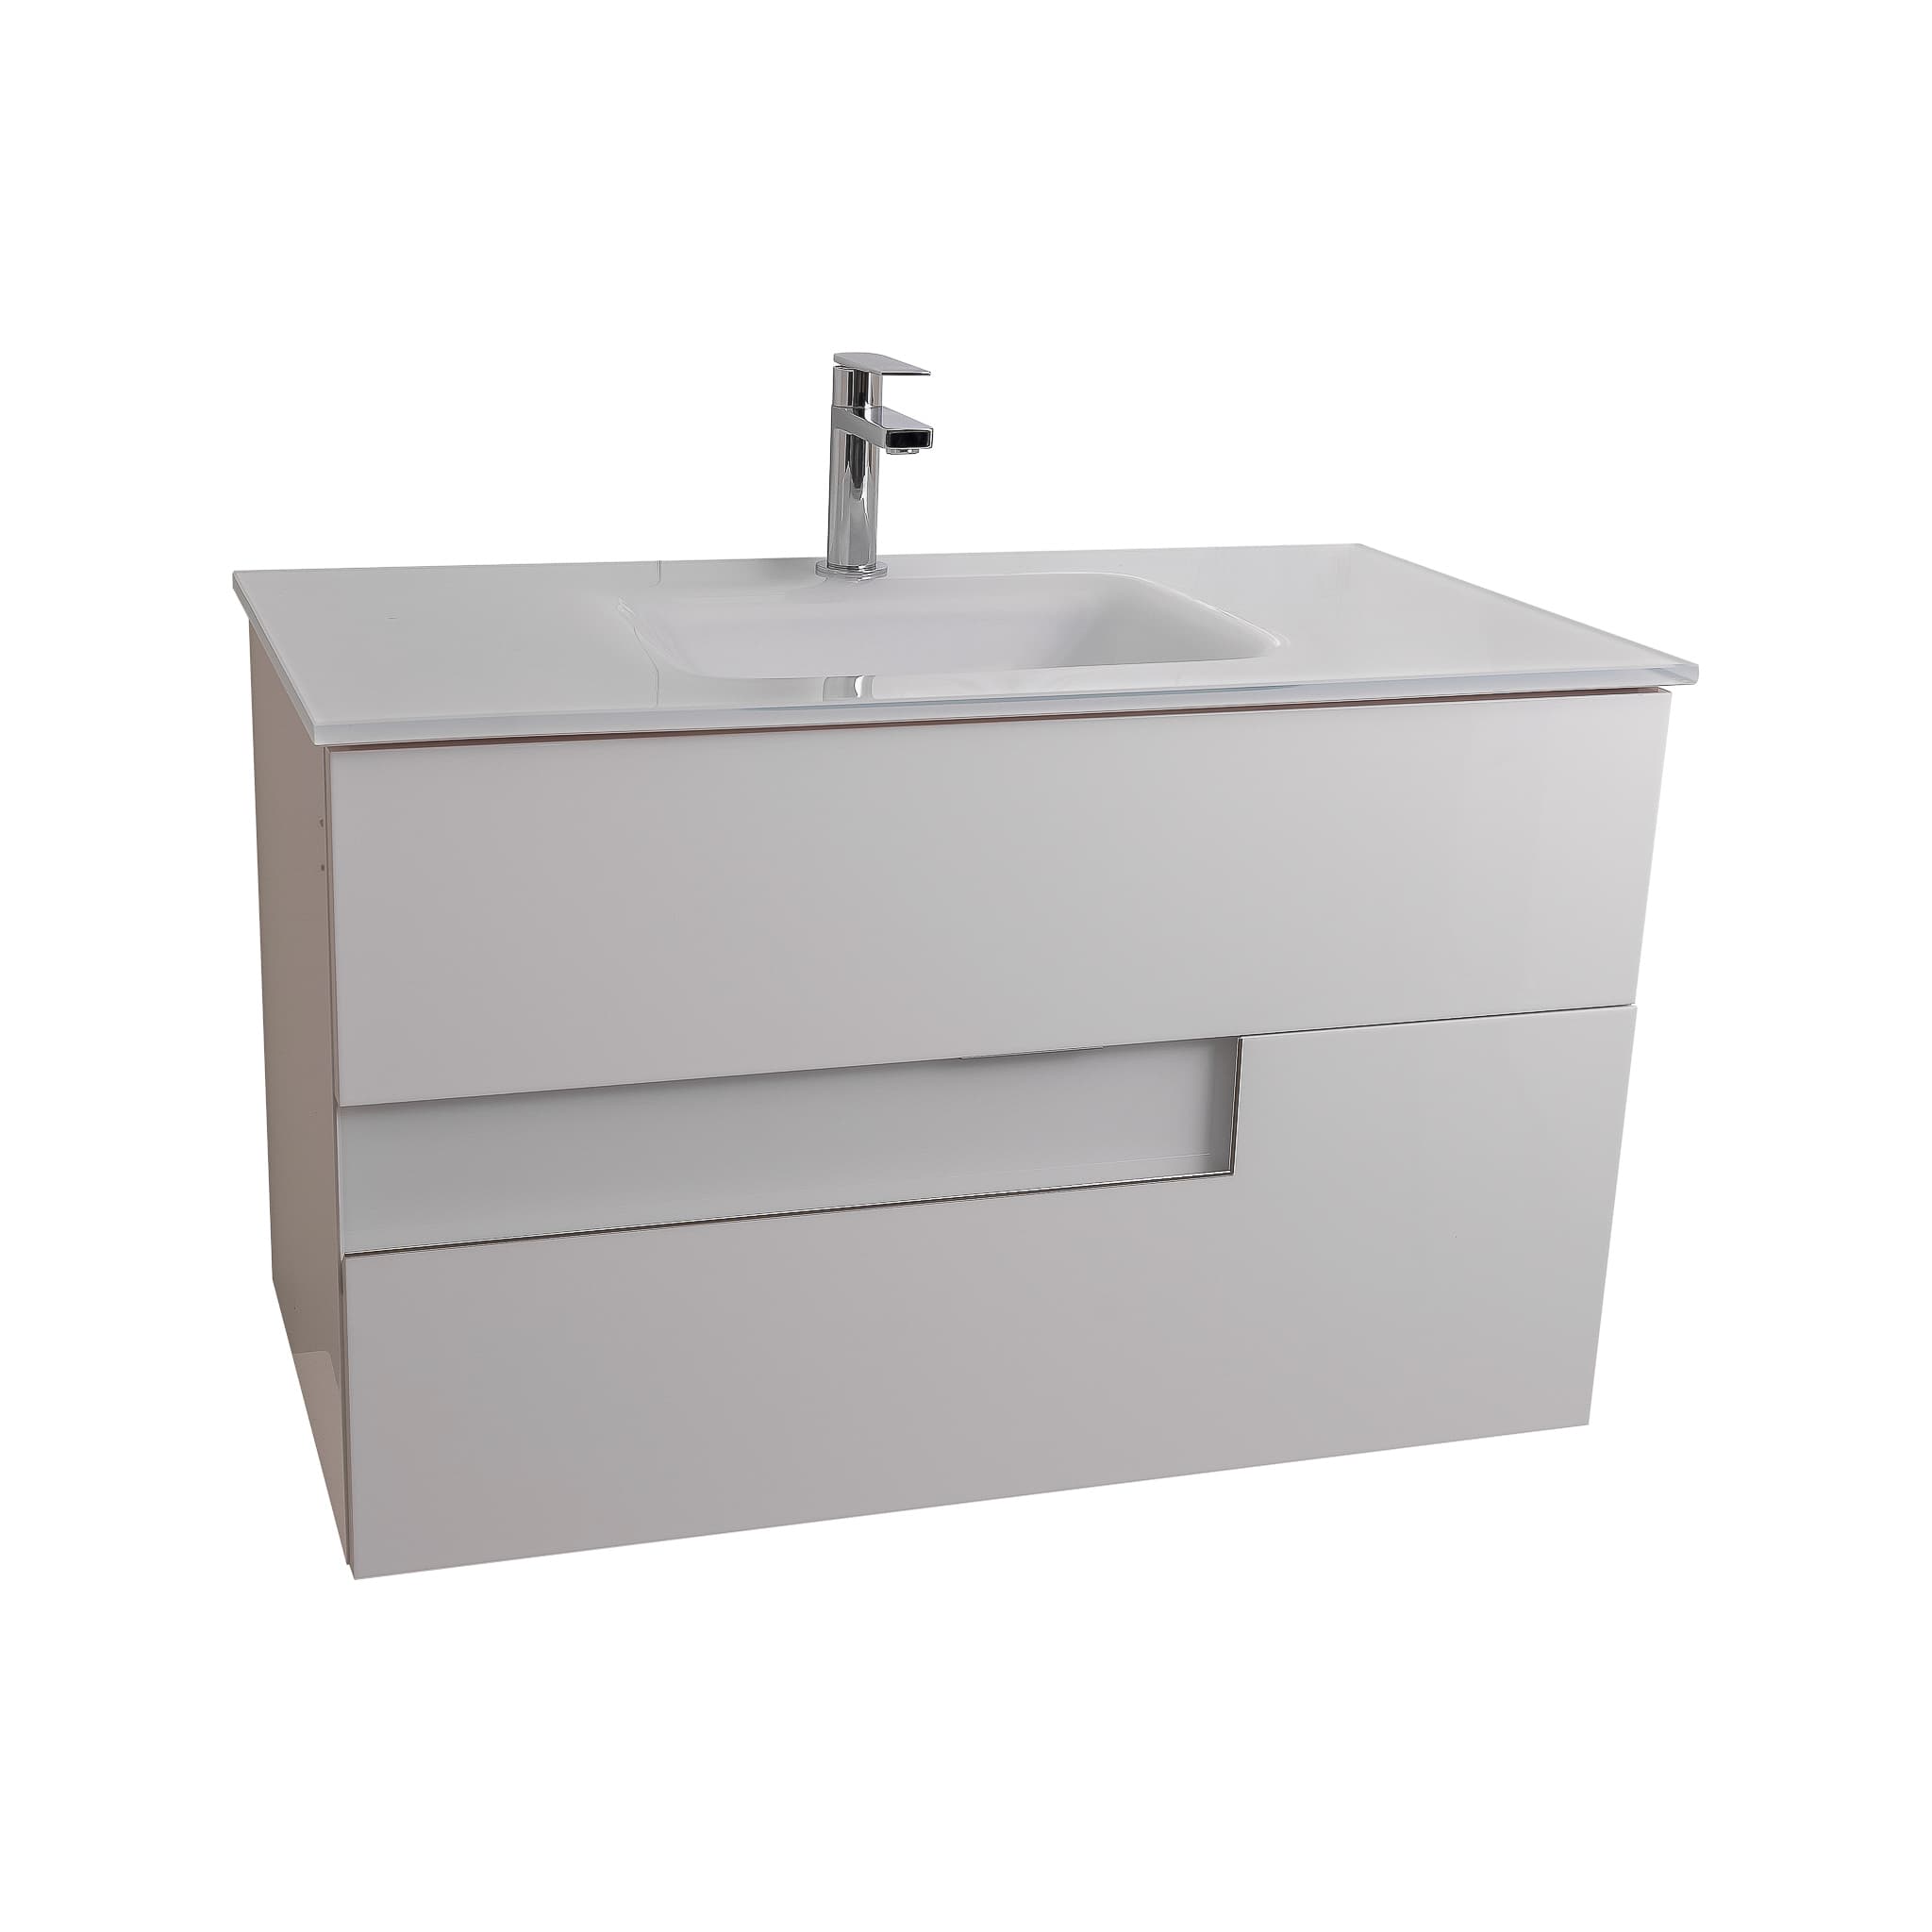 Vision 31.5 White High Gloss Cabinet, White Tempered Glass Sink, Wall Mounted Modern Vanity Set